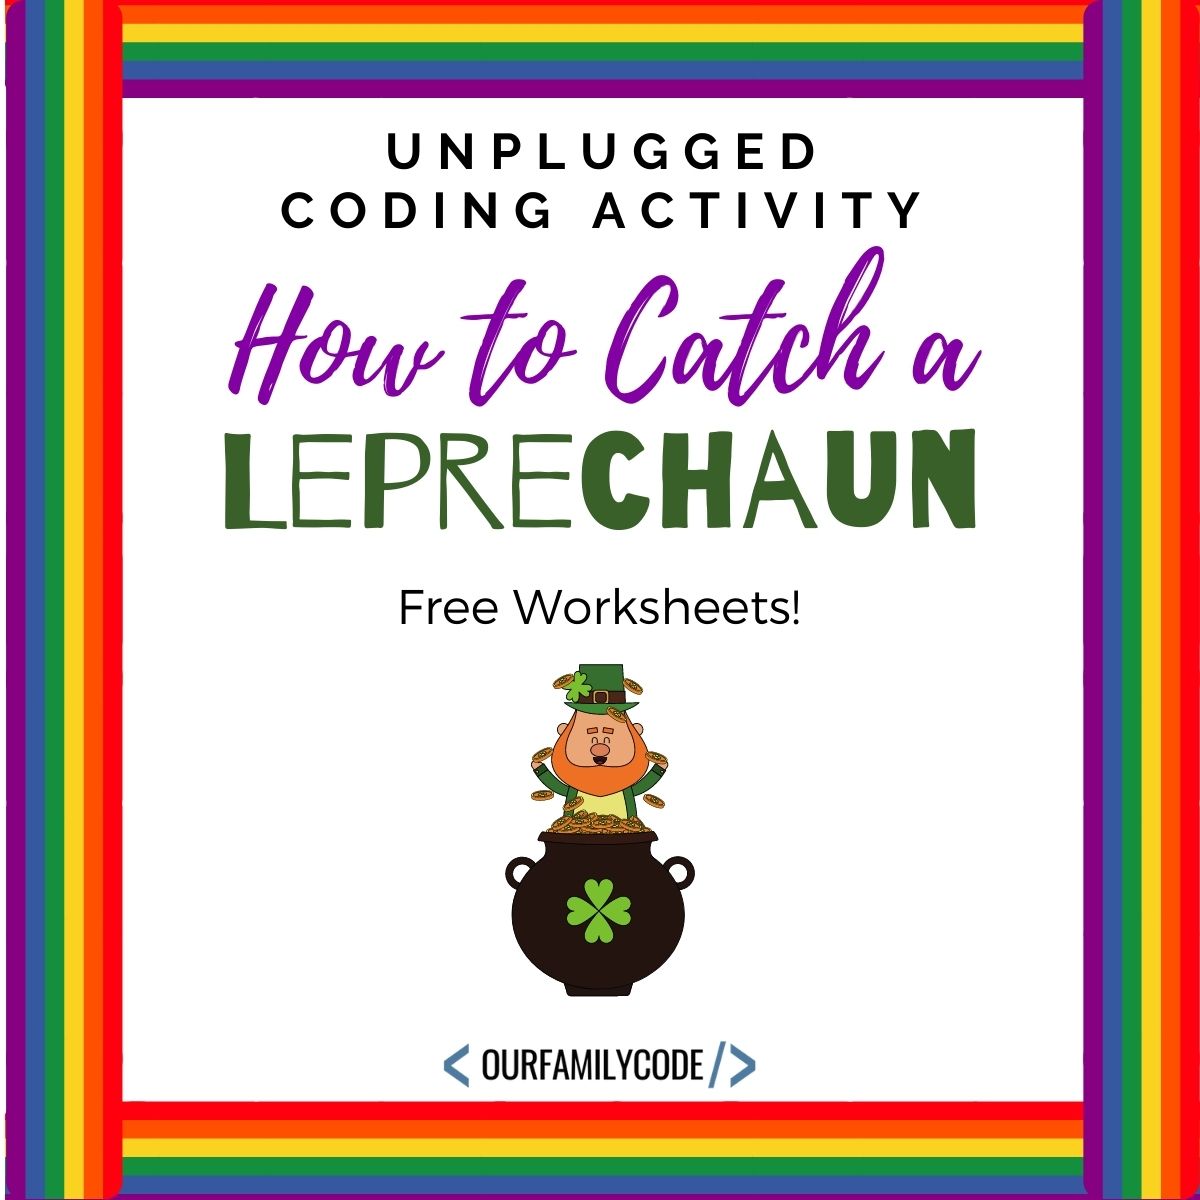 Help Paddy the Leprechaun avoid being caught by coding the sequence between the traps in this leprechaun sequence coding activity!! #teachkidstocode #freeworksheets #codingactivitiesforkids #STEM #STEAM #unpluggedcoding